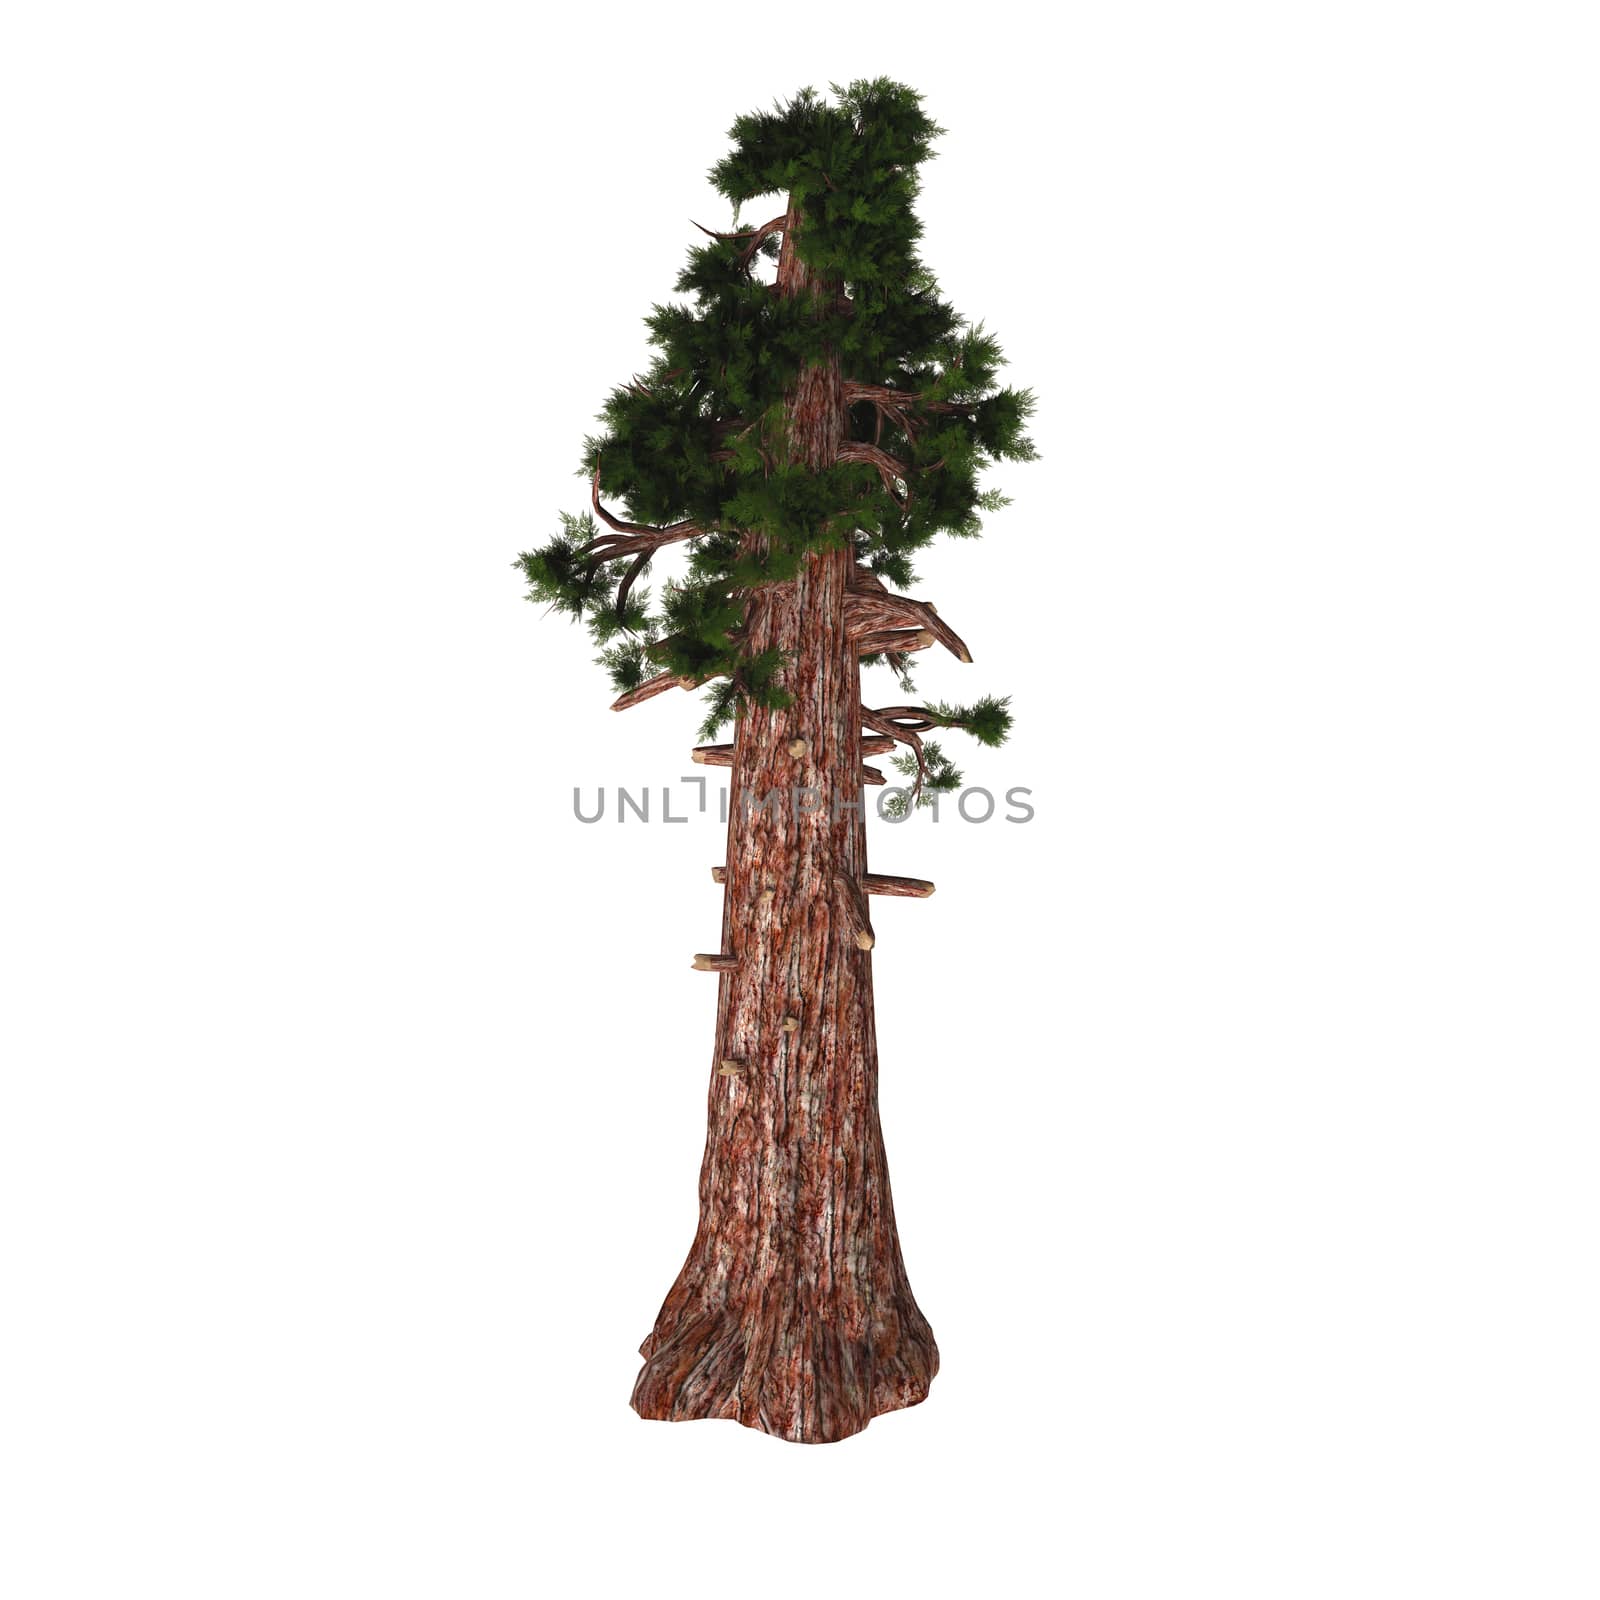 Sequoiadendron giganteum (giant sequoia, giant redwood, Sierra redwood, Sierran redwood, or Wellingtonia) is the sole living species in the genus Sequoiadendron, and one of three species of coniferous trees known as redwoods.